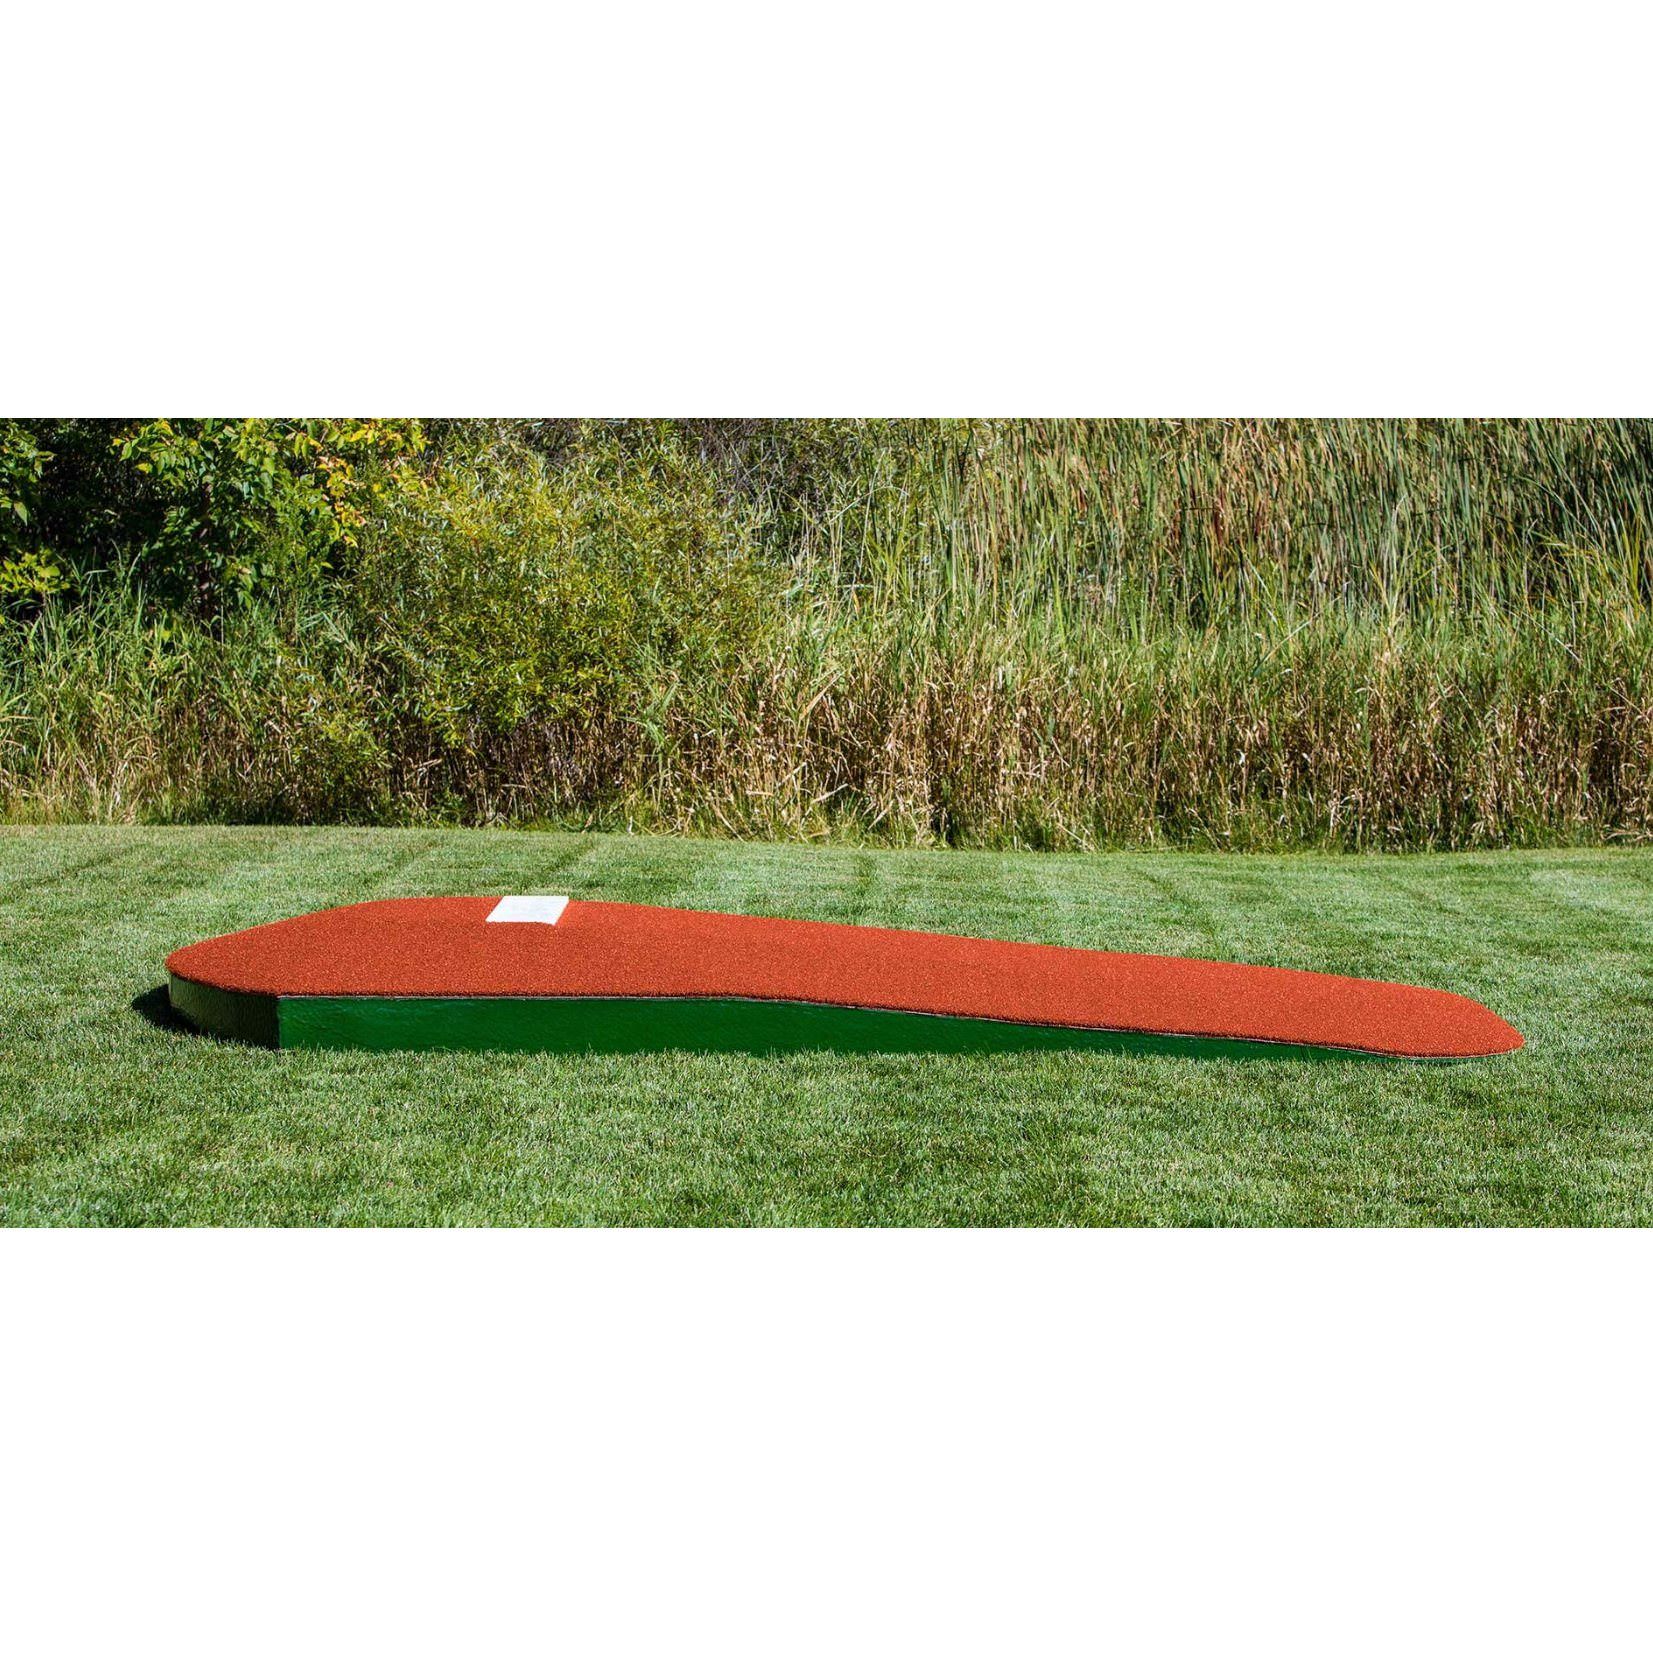 Portolite 10" Portable Practice Pitching Mound red side view